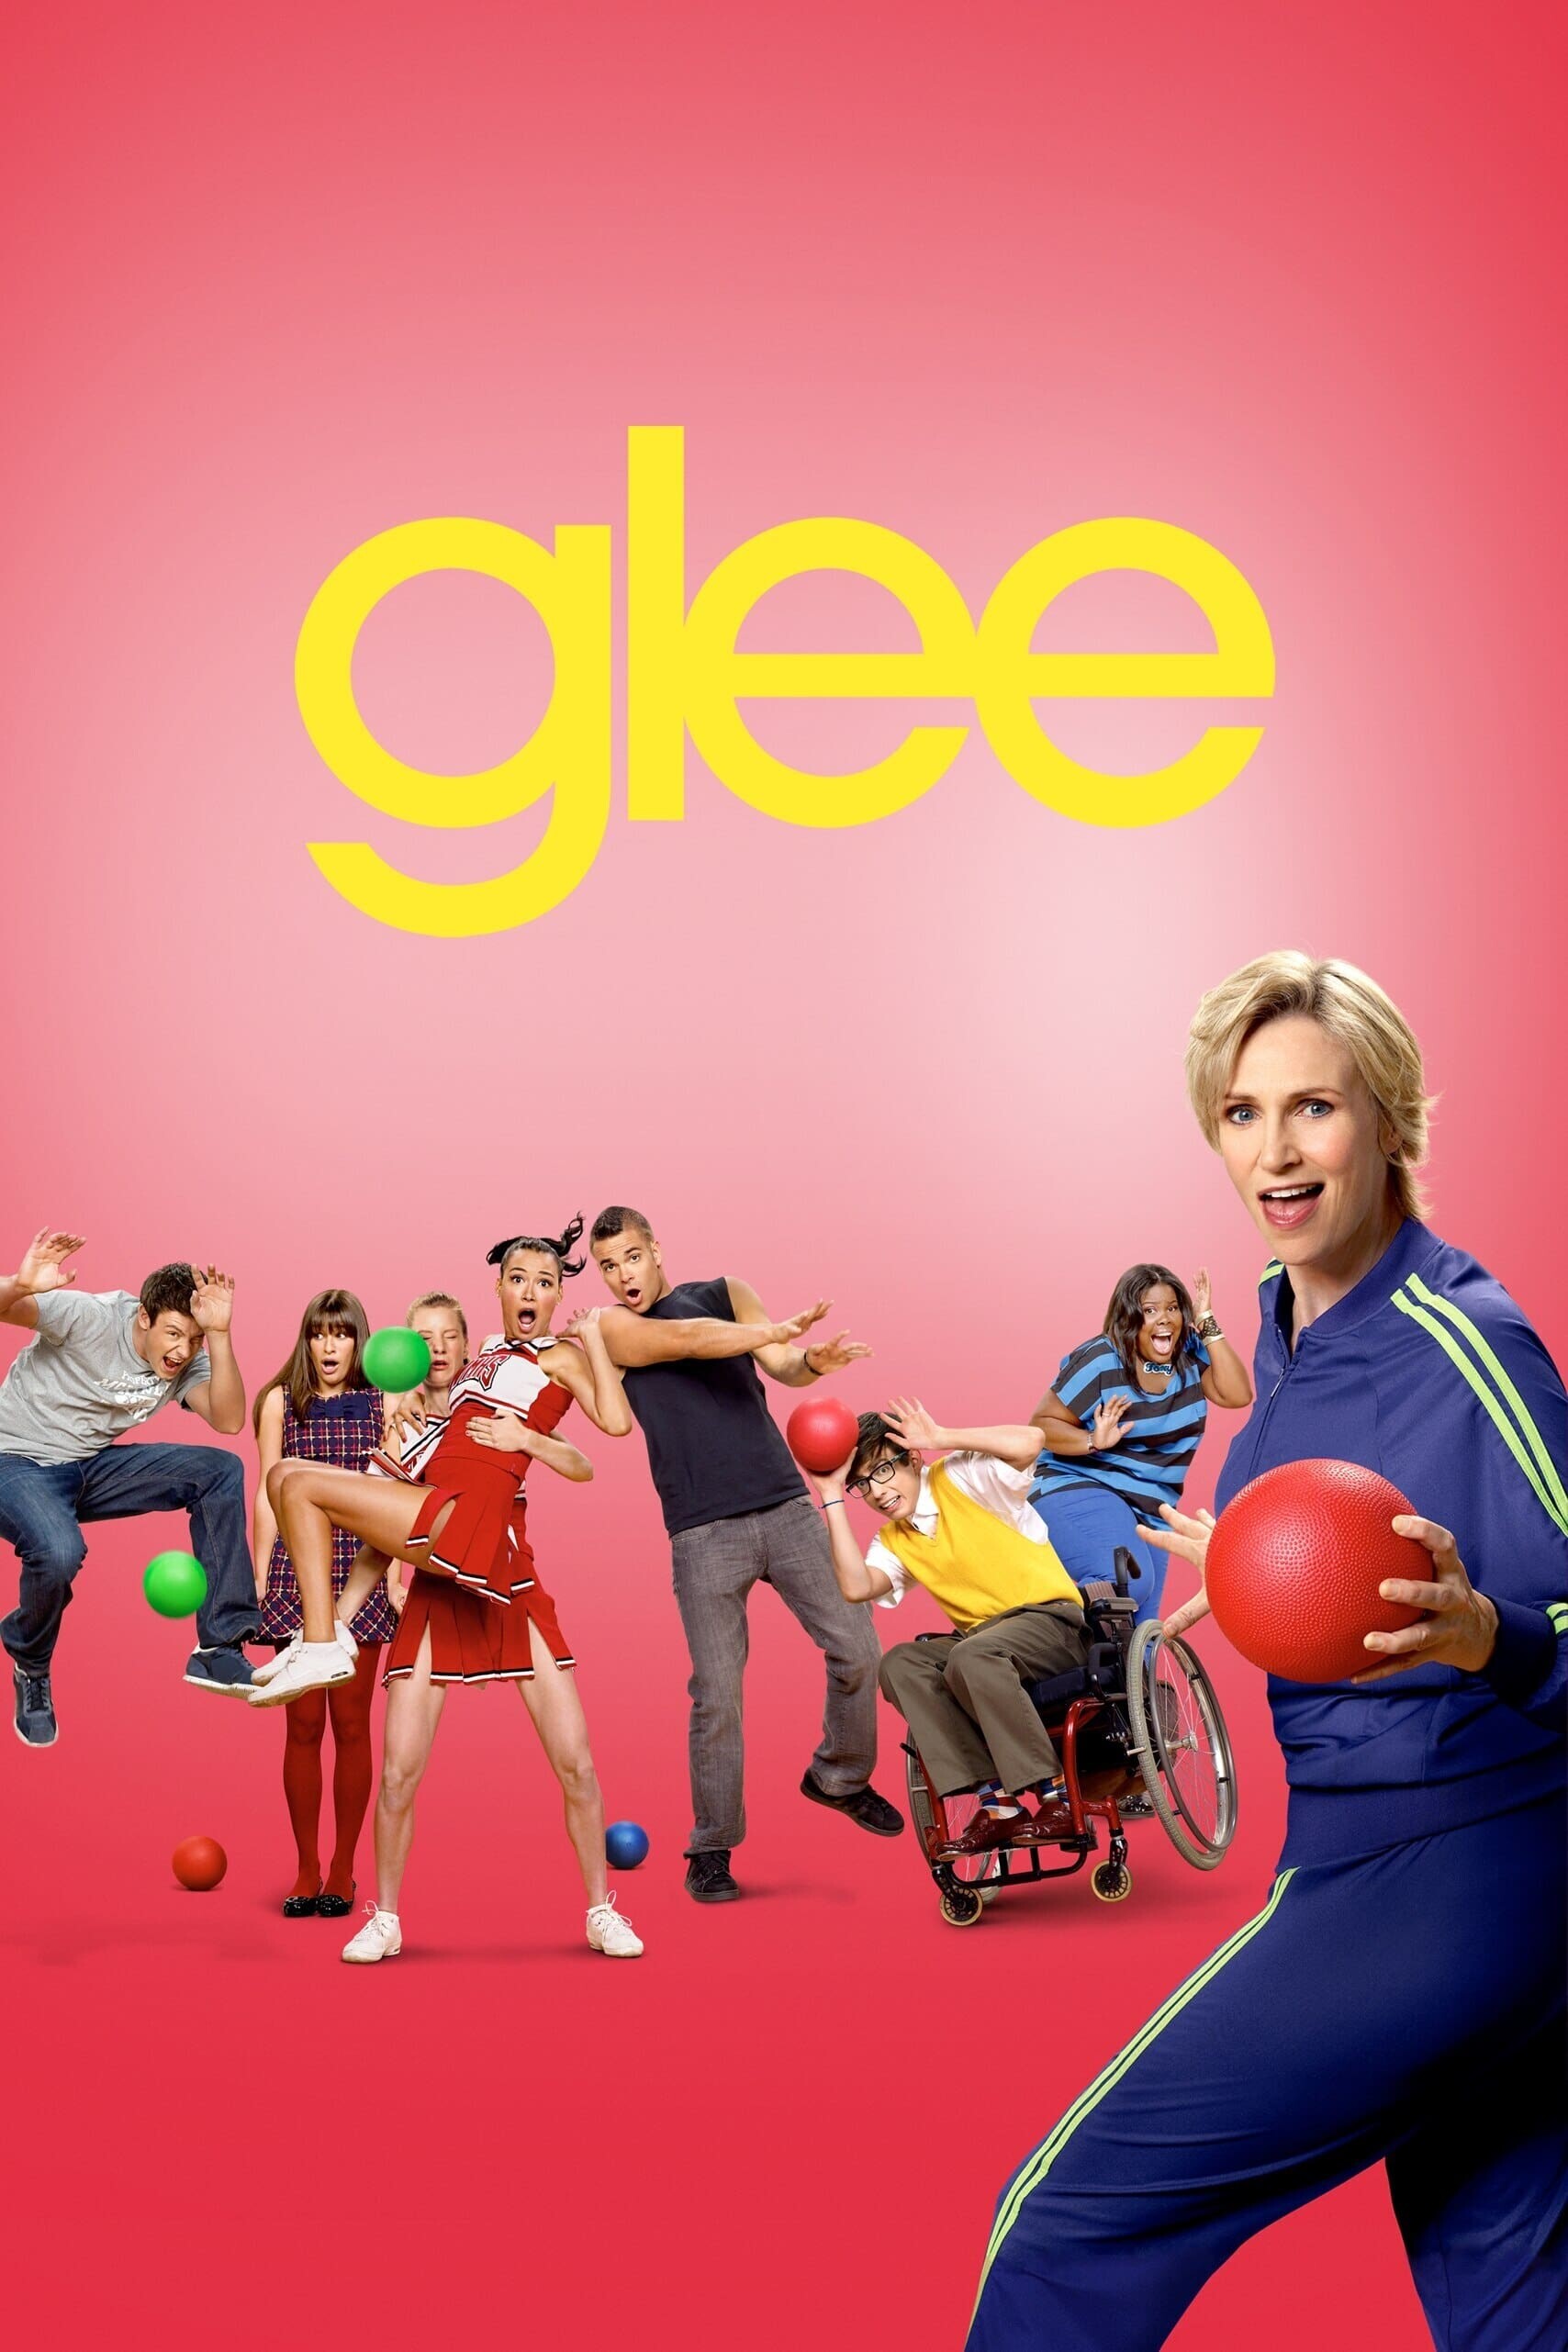 Glee (TV series): The 2011 Golden Globe Award for Best Supporting Actress for Jane Lynch. 1710x2570 HD Wallpaper.